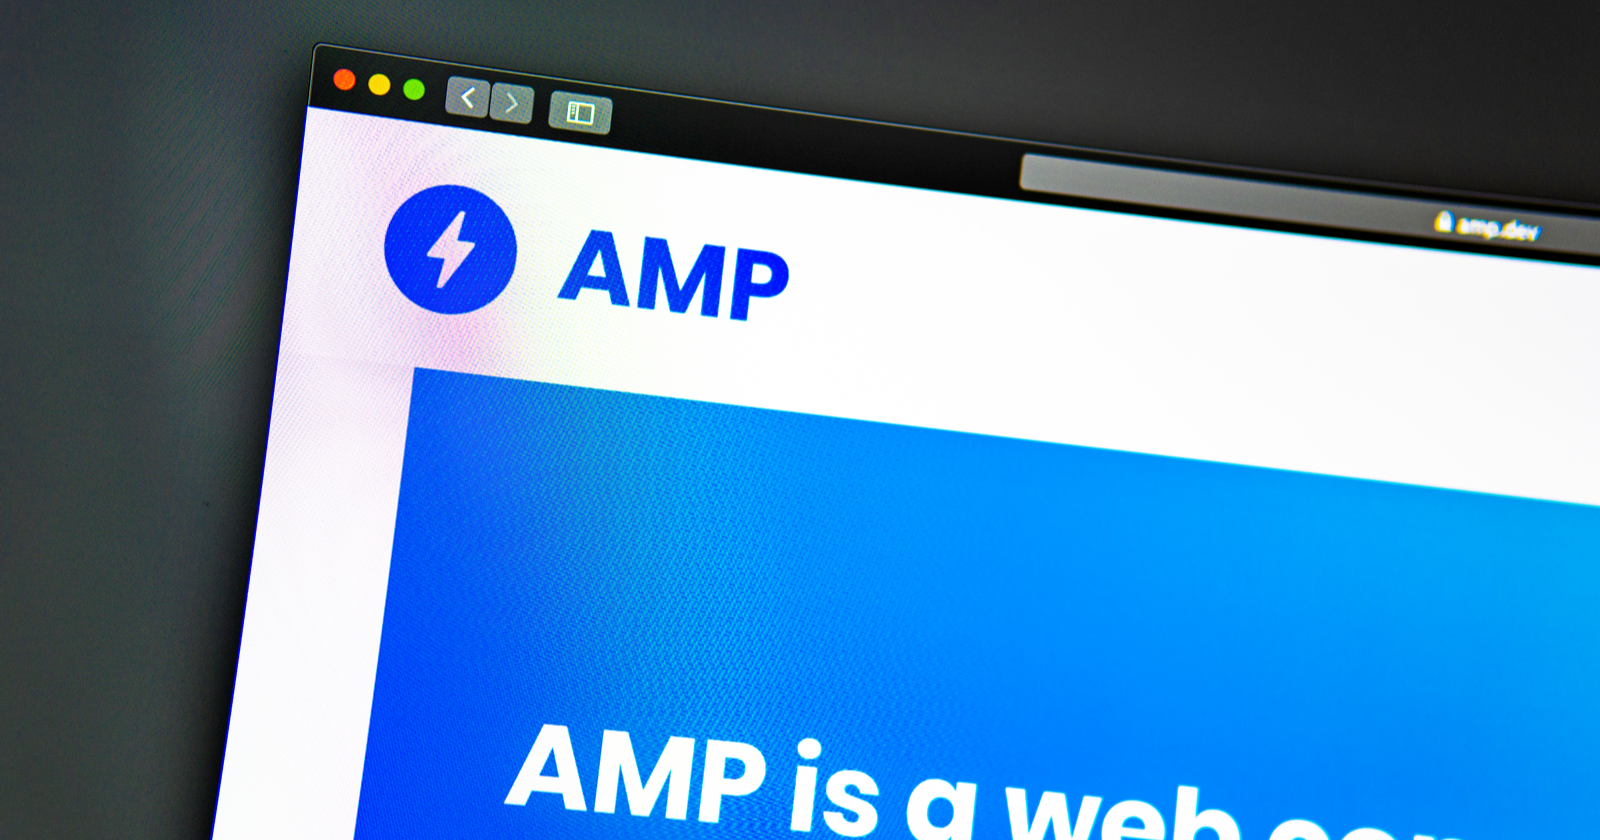 10-best-amp-wordpress-plugins-for-speed-search-tracking-5e061740449a3.png